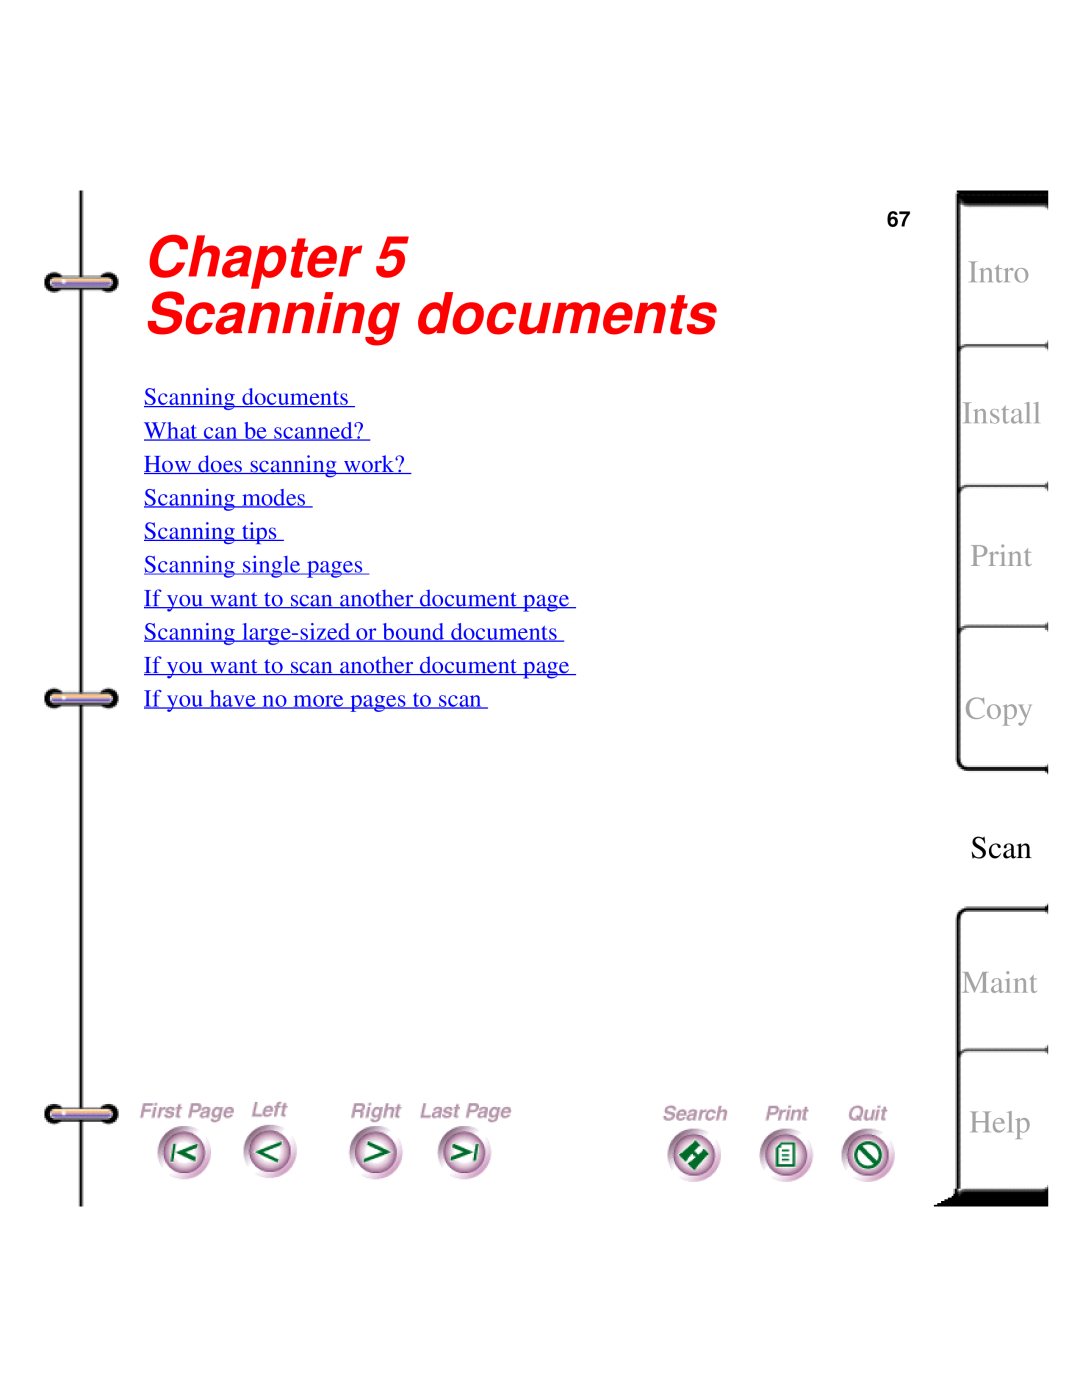 Xerox Document HomeCentre manual Chapter Scanning documents, Intro Install Print Copy, Maint, Help 